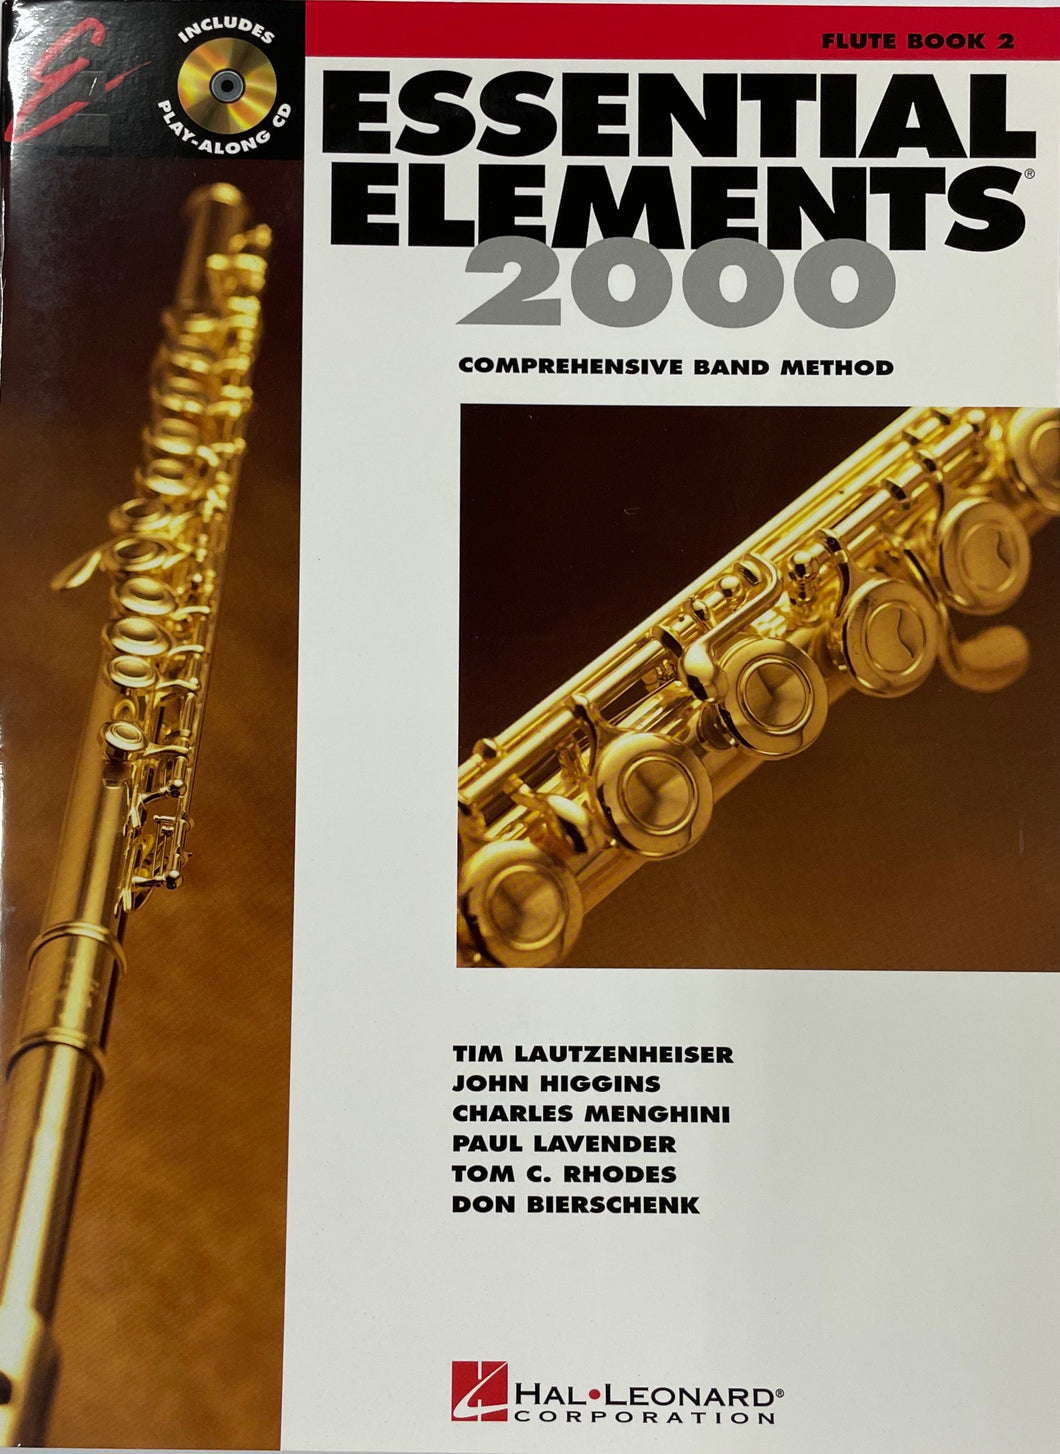 Essential Elements Flute Book 2 with CD